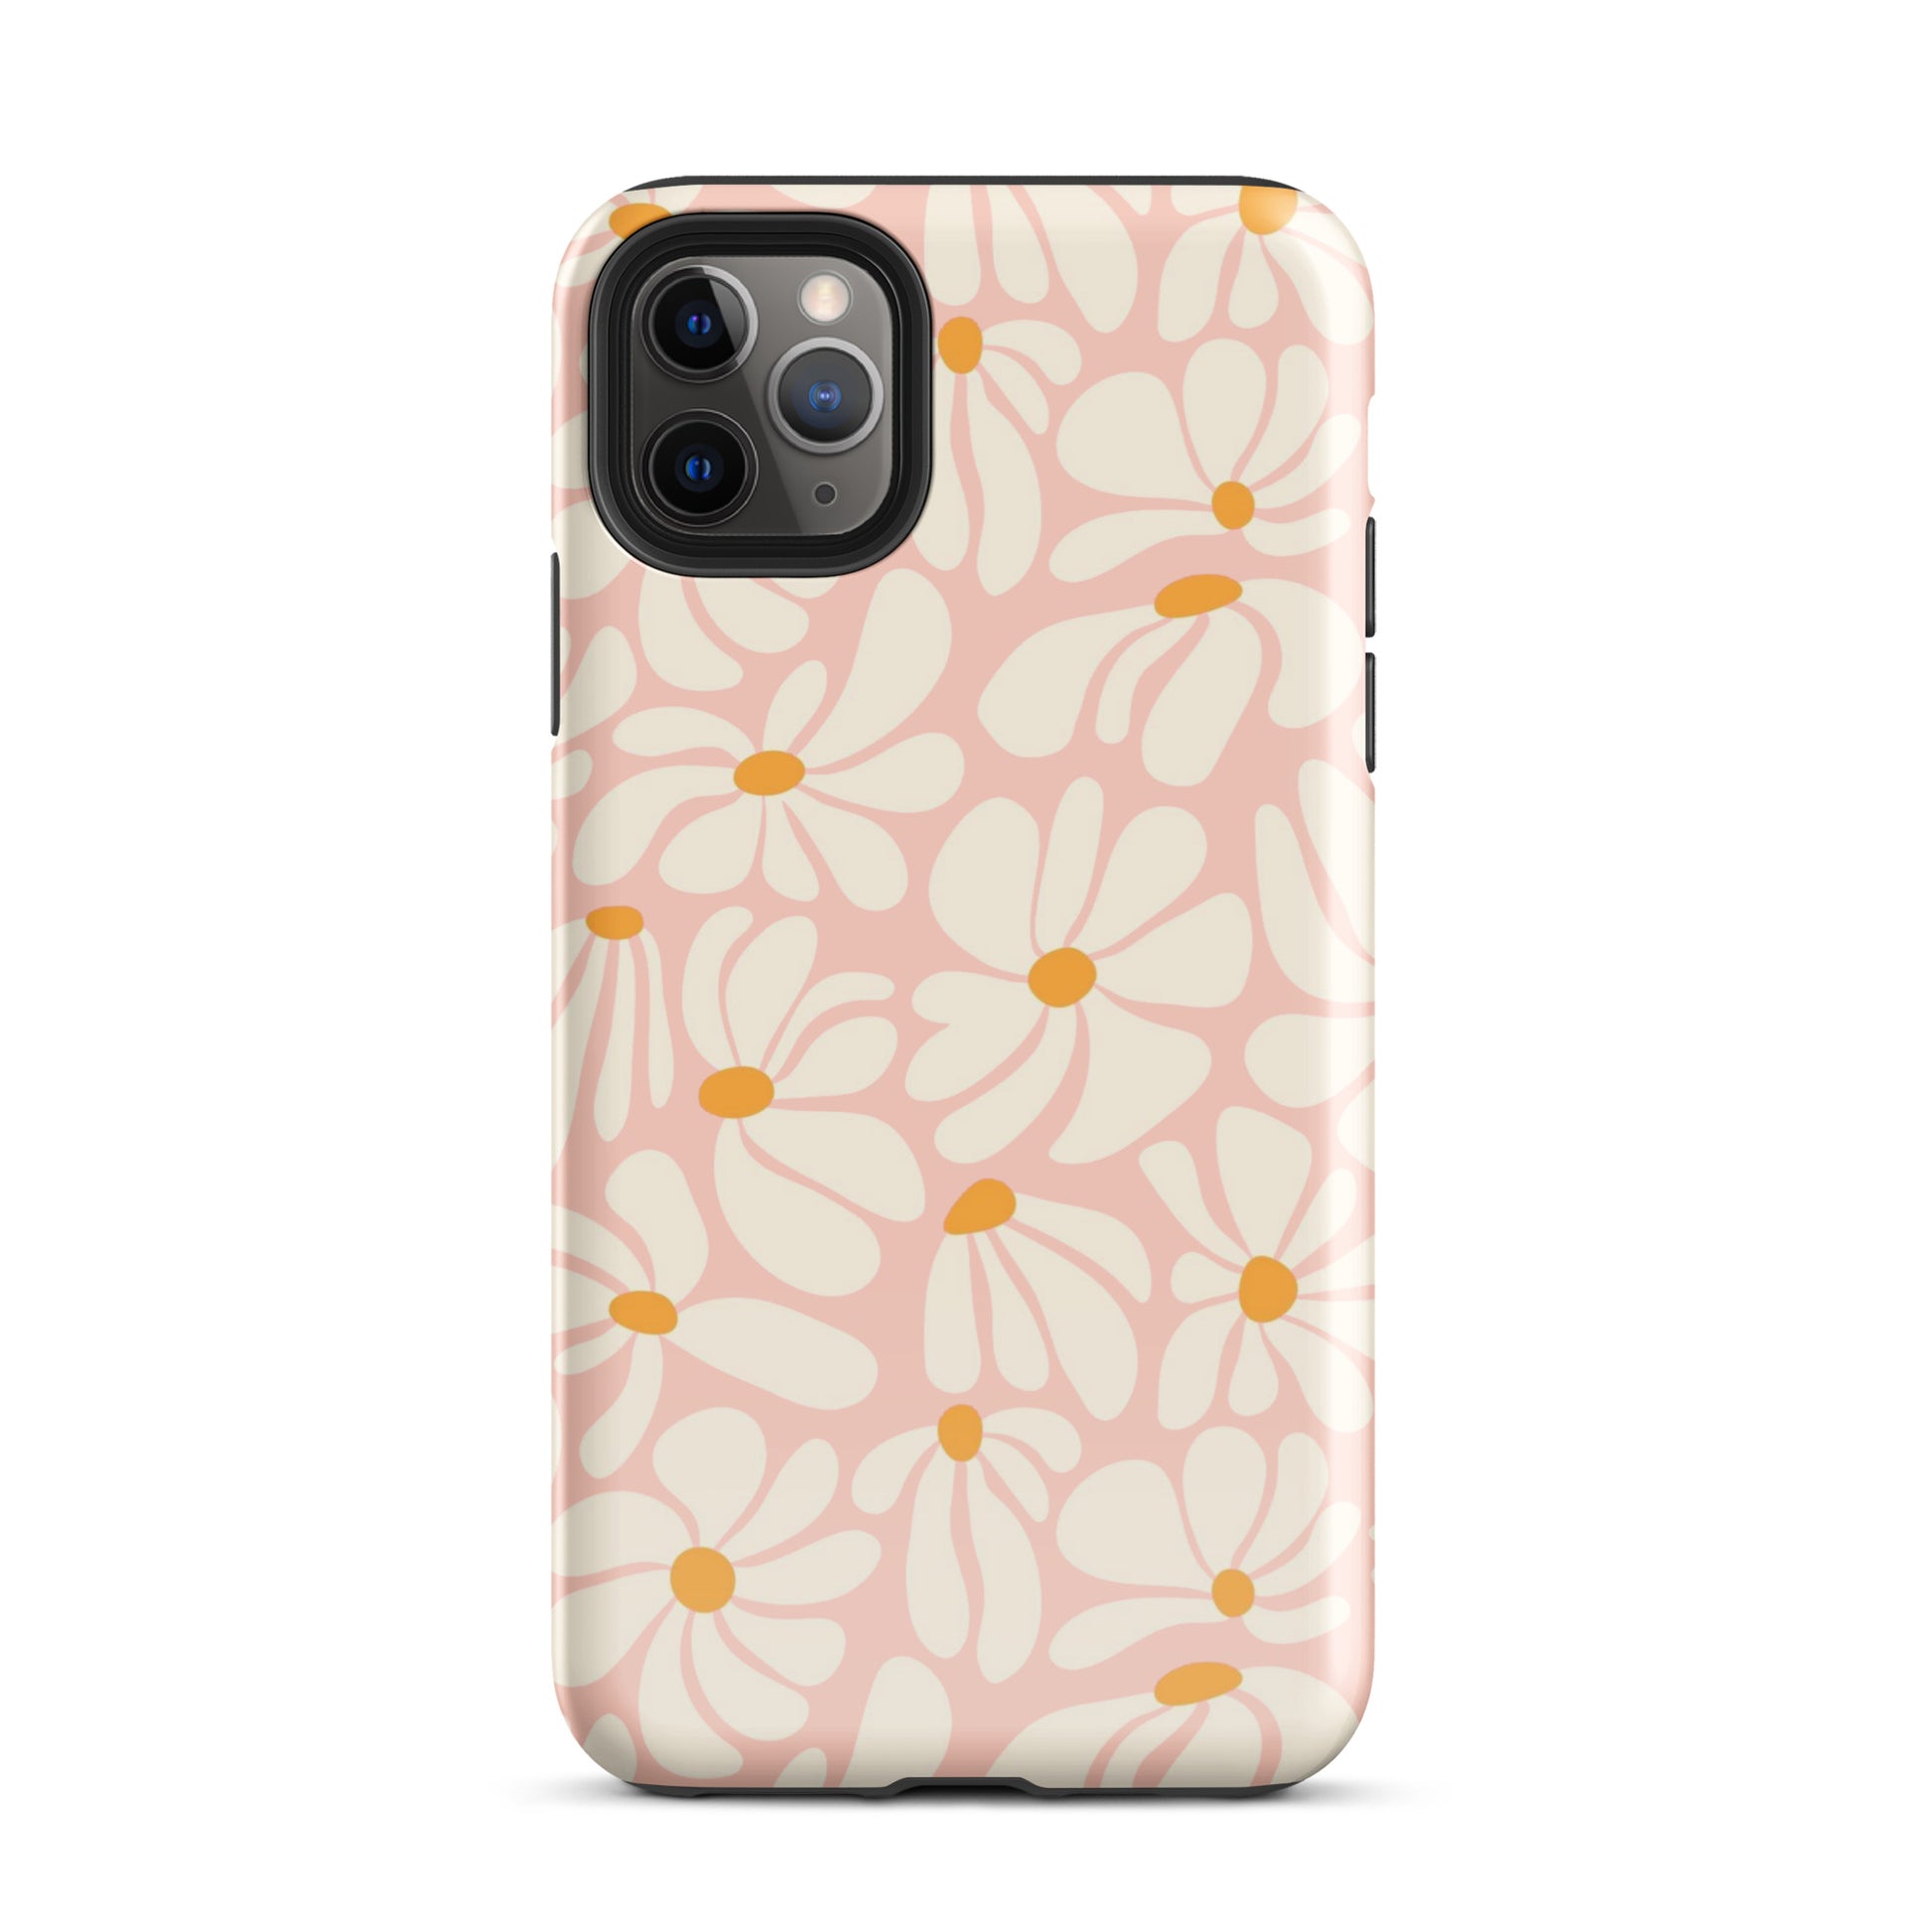 Flower Child iPhone Case iPhone 11 Pro Max Glossy